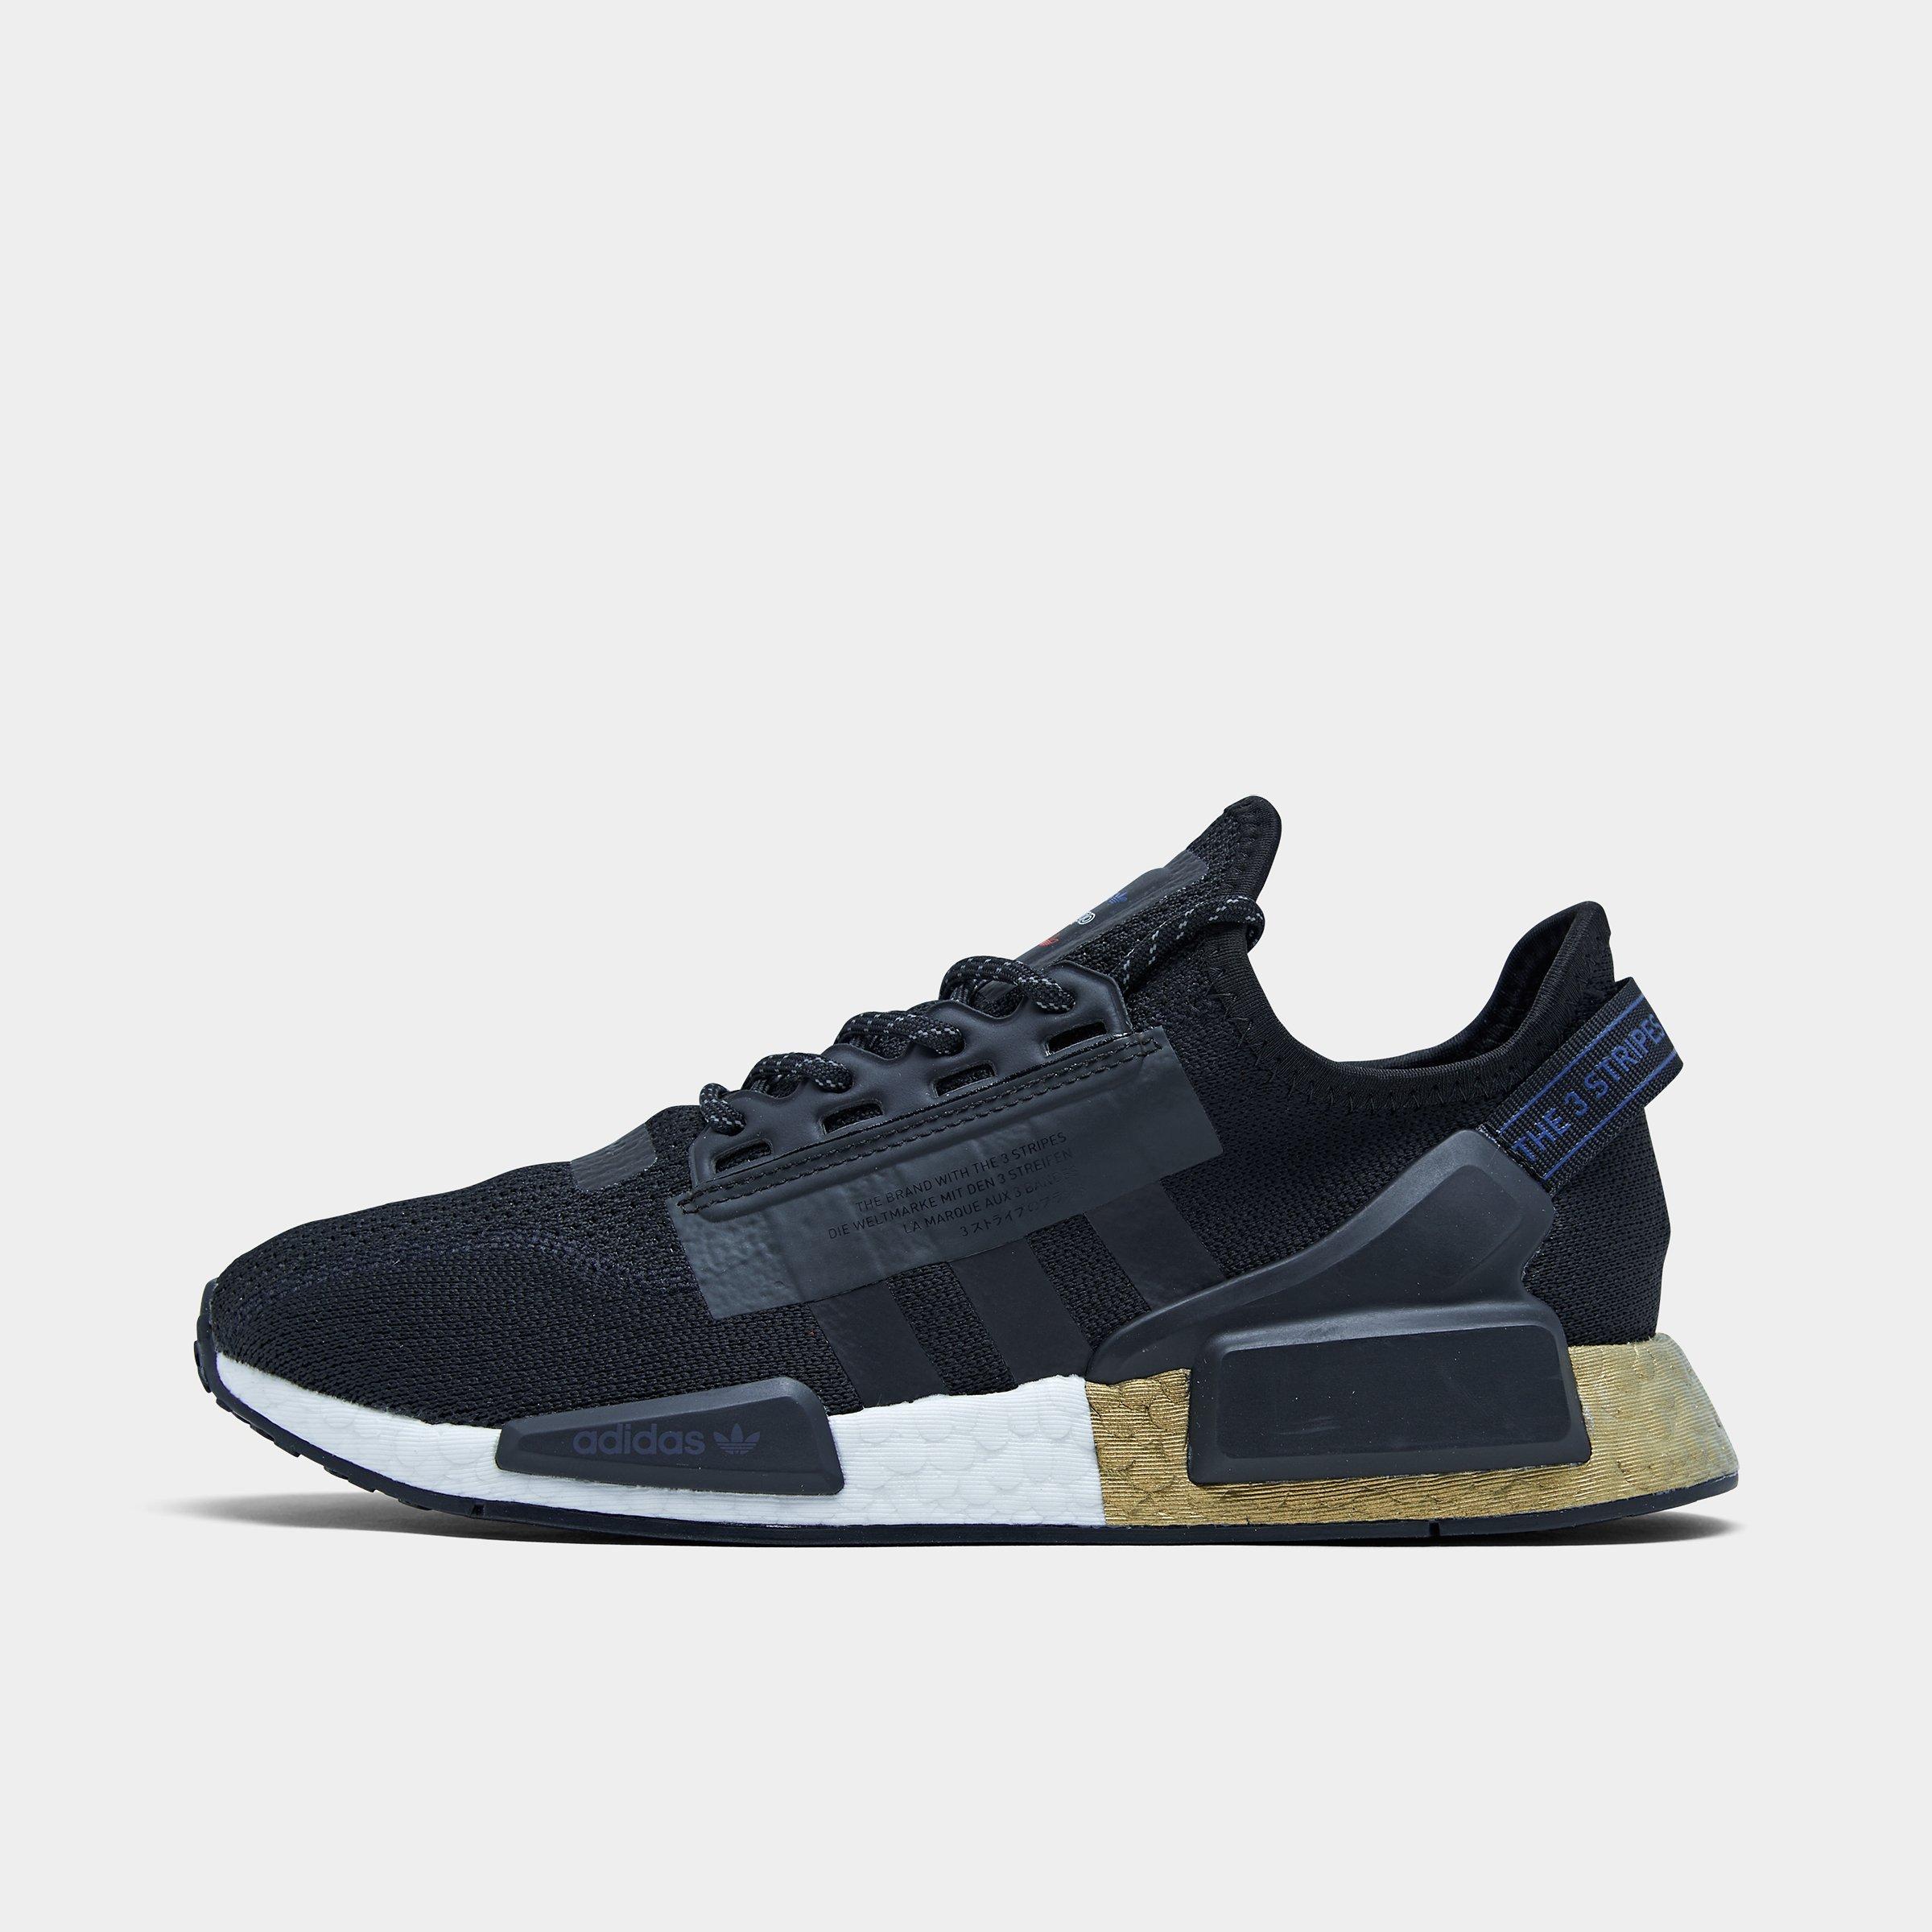 Adidas Adidas NMD R1 Olive Cargo Pack Trainers All Sizes